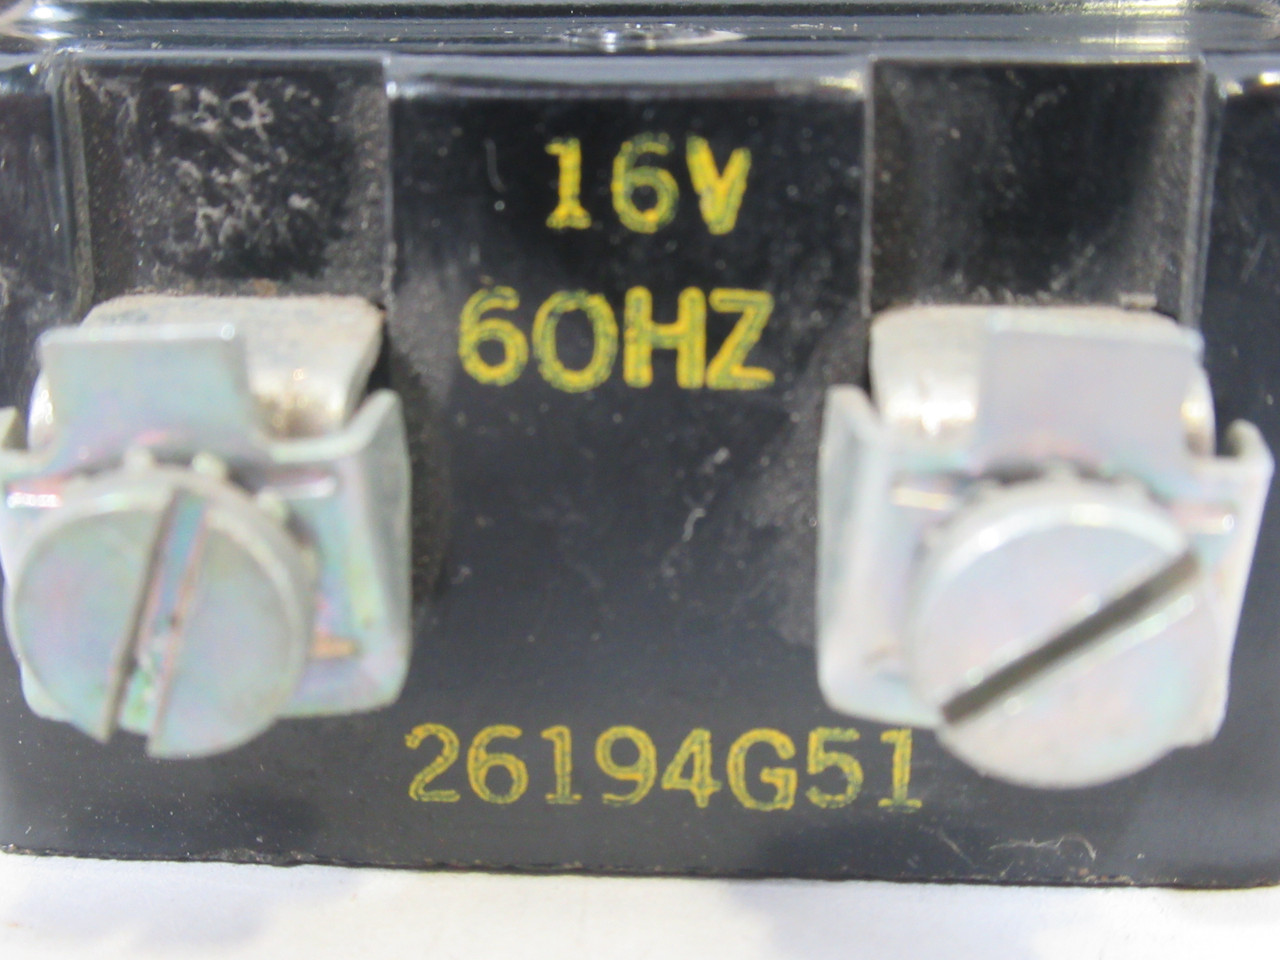 General Electric 26194G51 Contactor Coil 16V@60Hz USED